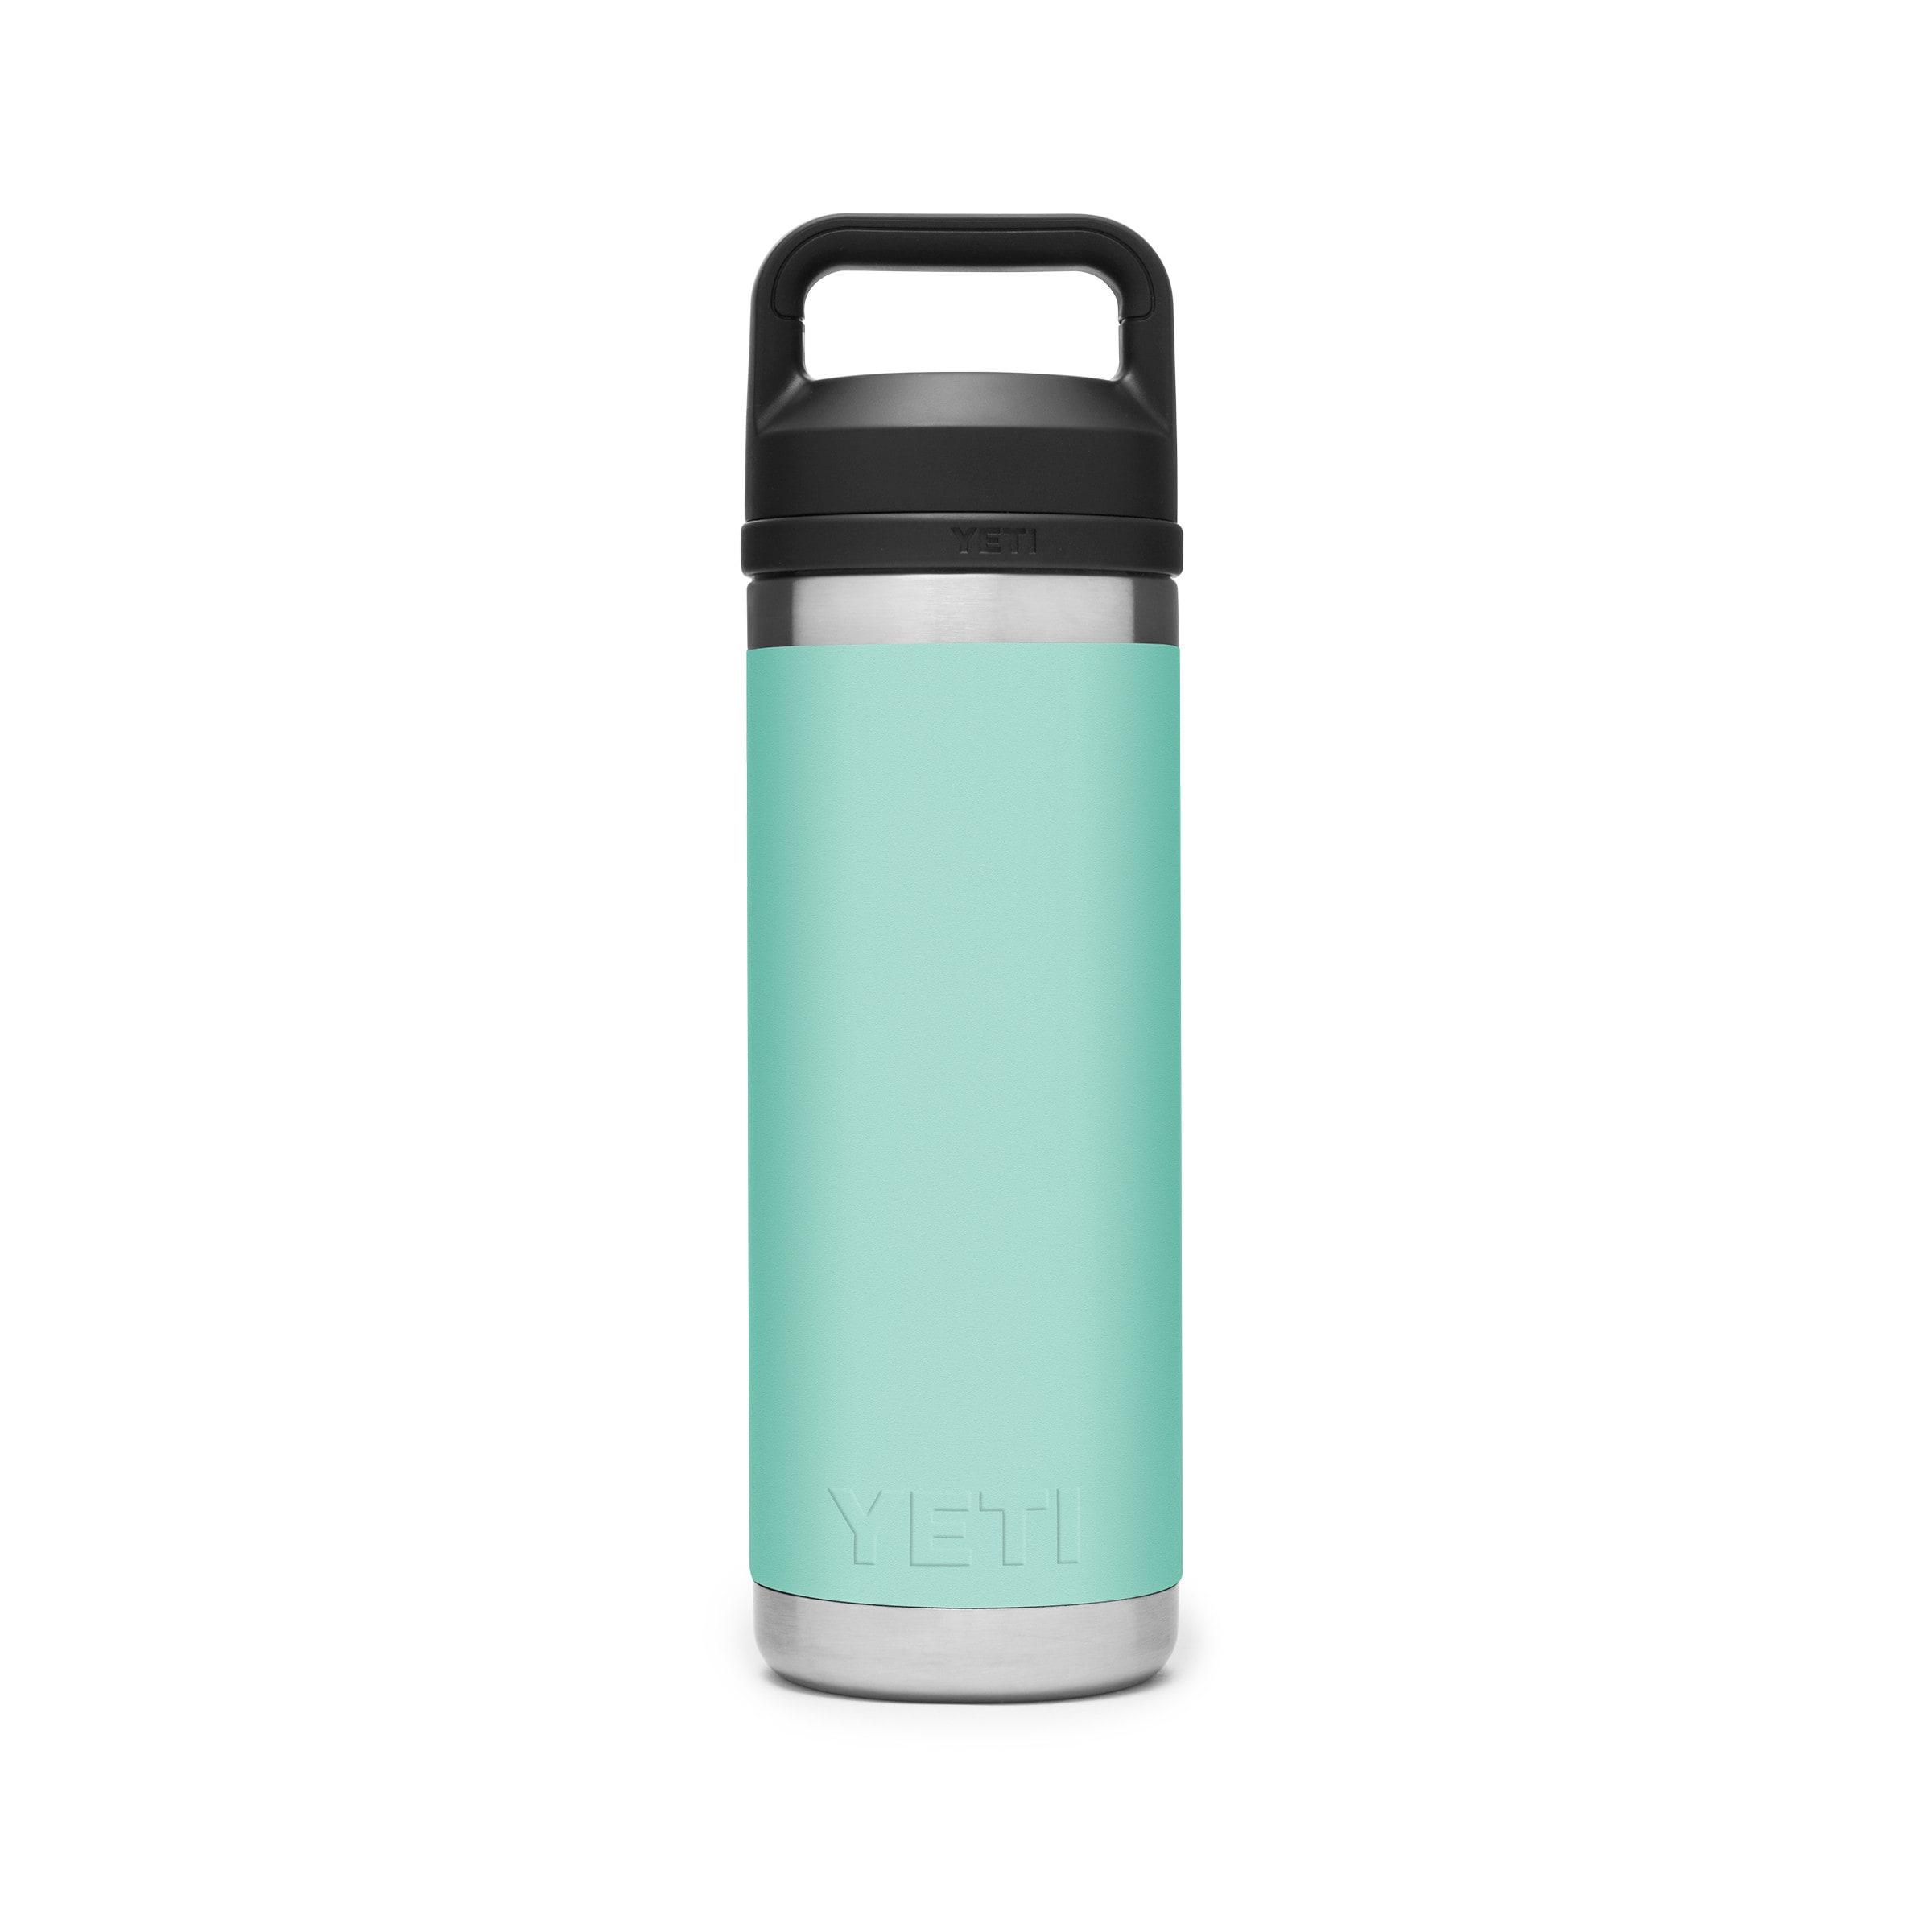 NWT YETI Rambler 18 Oz Water Bottle - Rare Clay - Retired Color